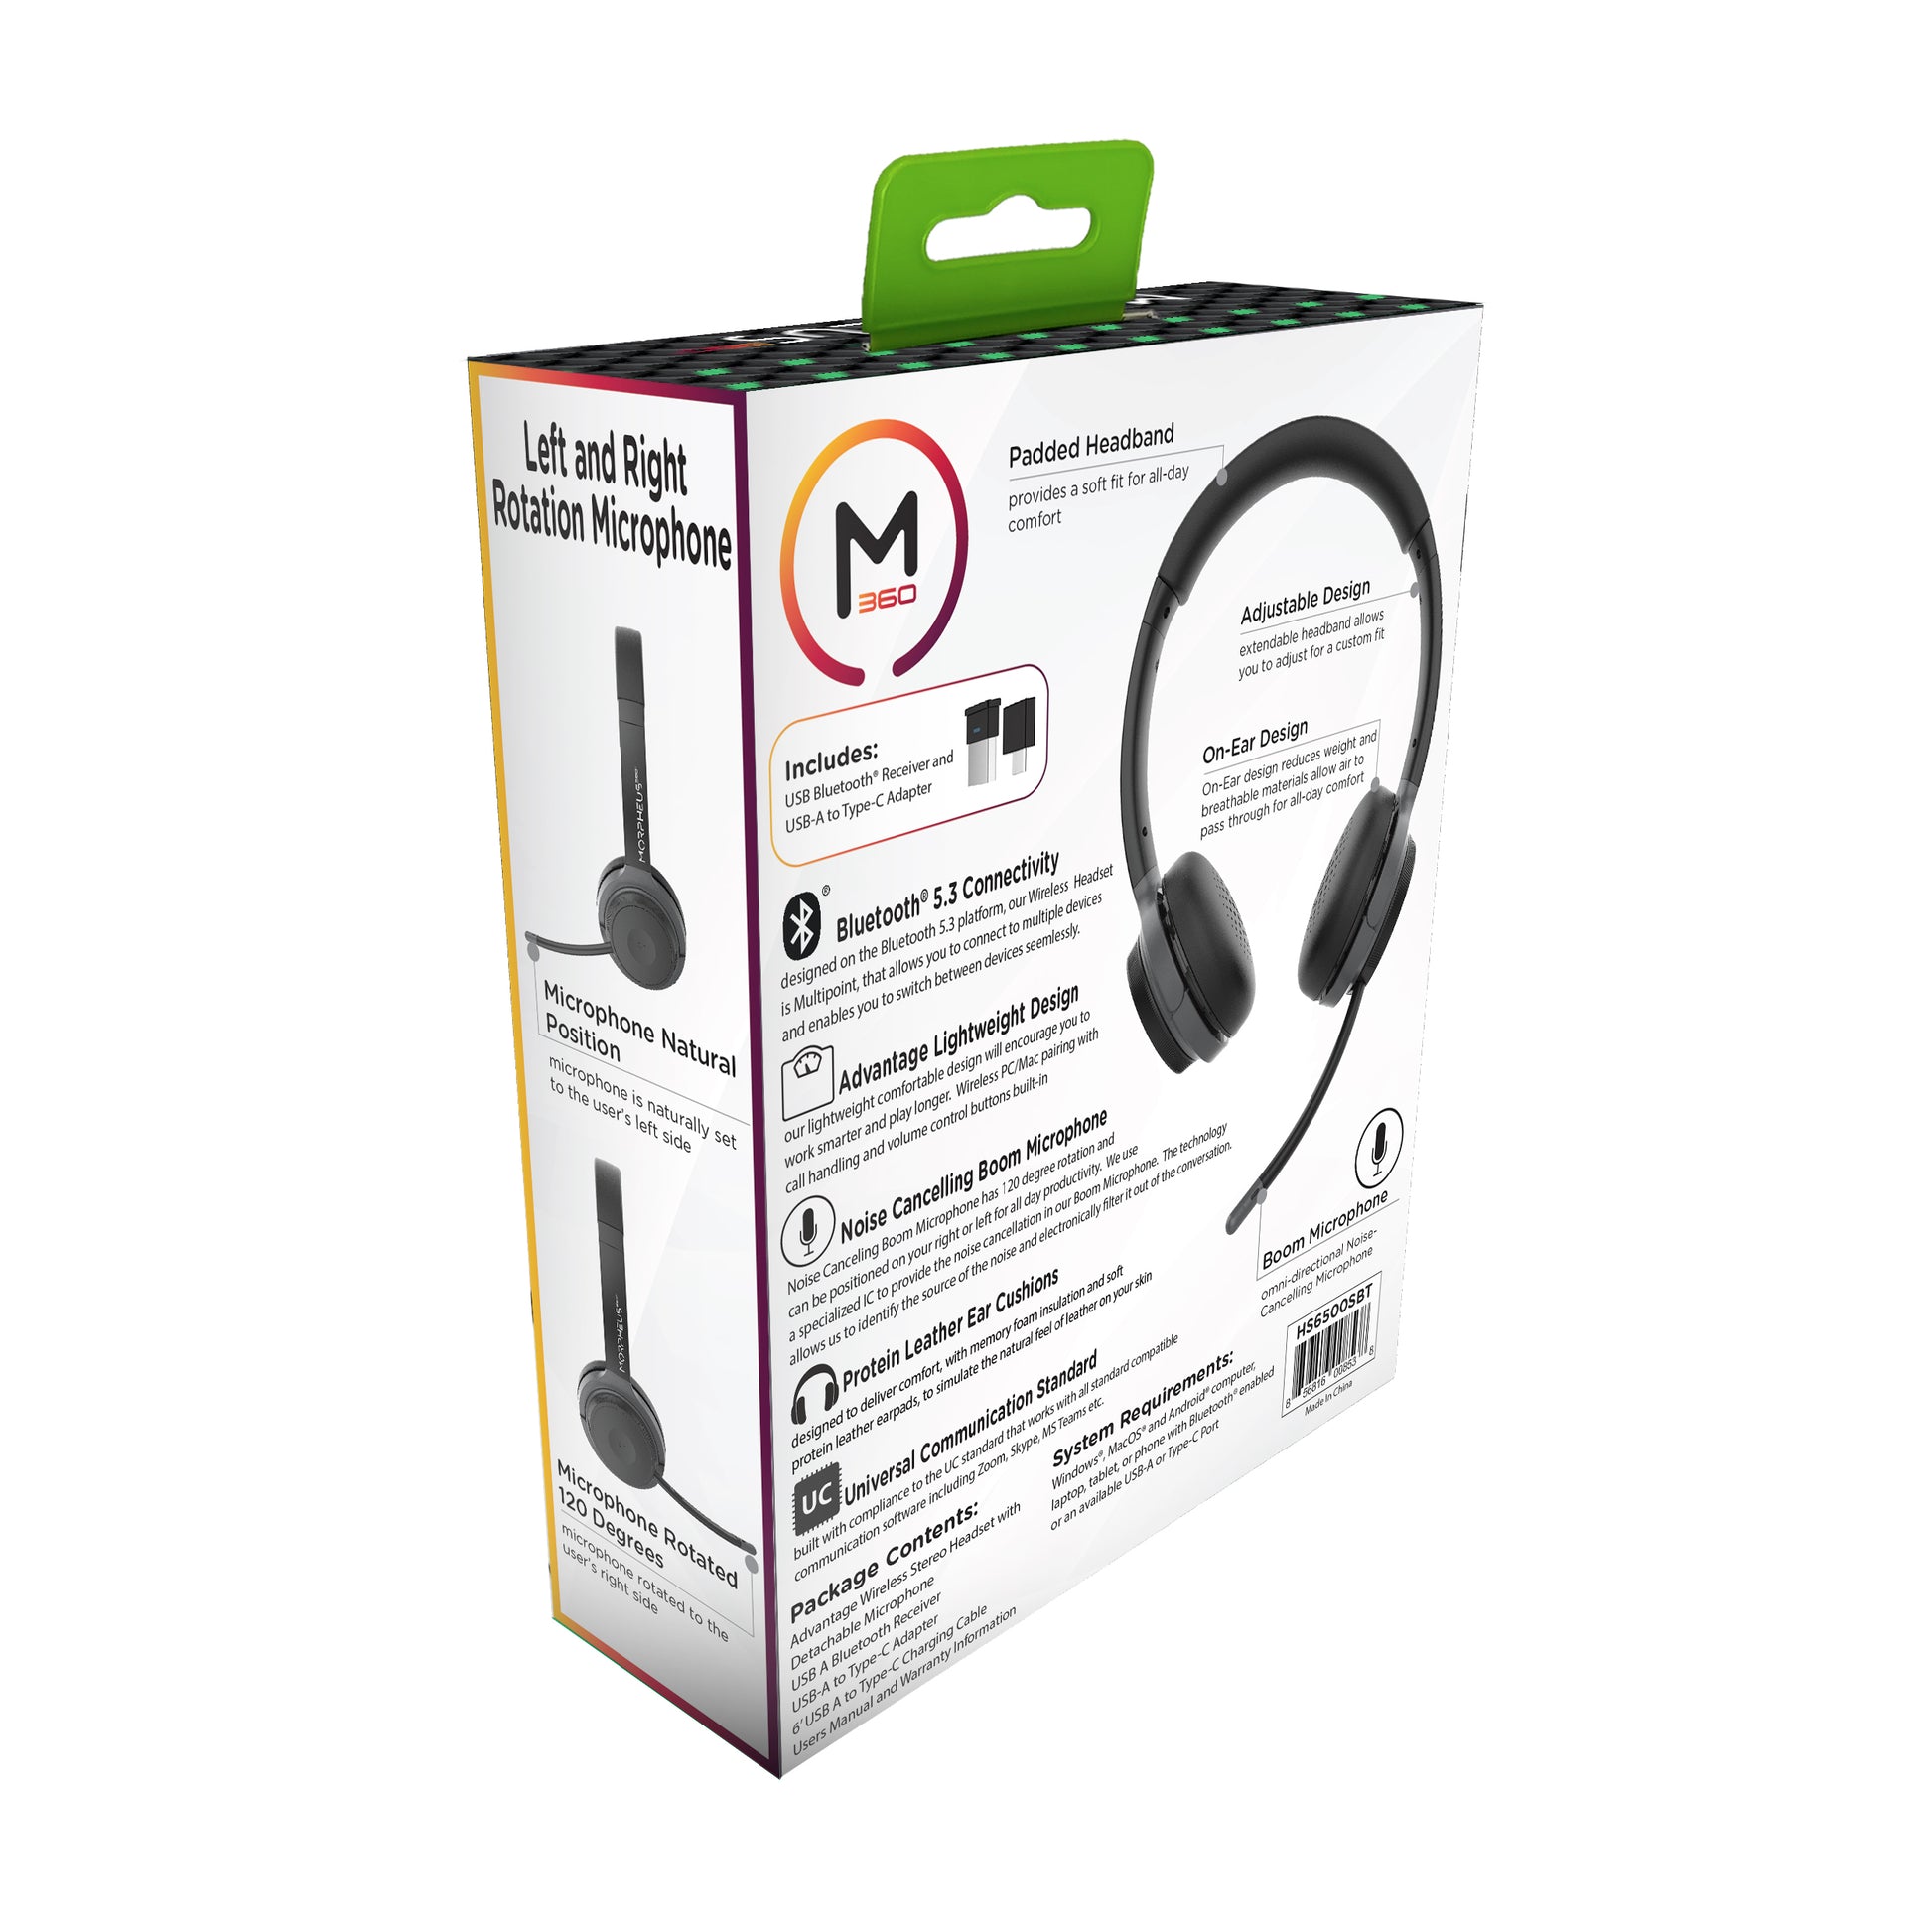 Morpheus 360 HS6500SBT Advantage Wireless Stereo Headset with Detachable Boom Microphone